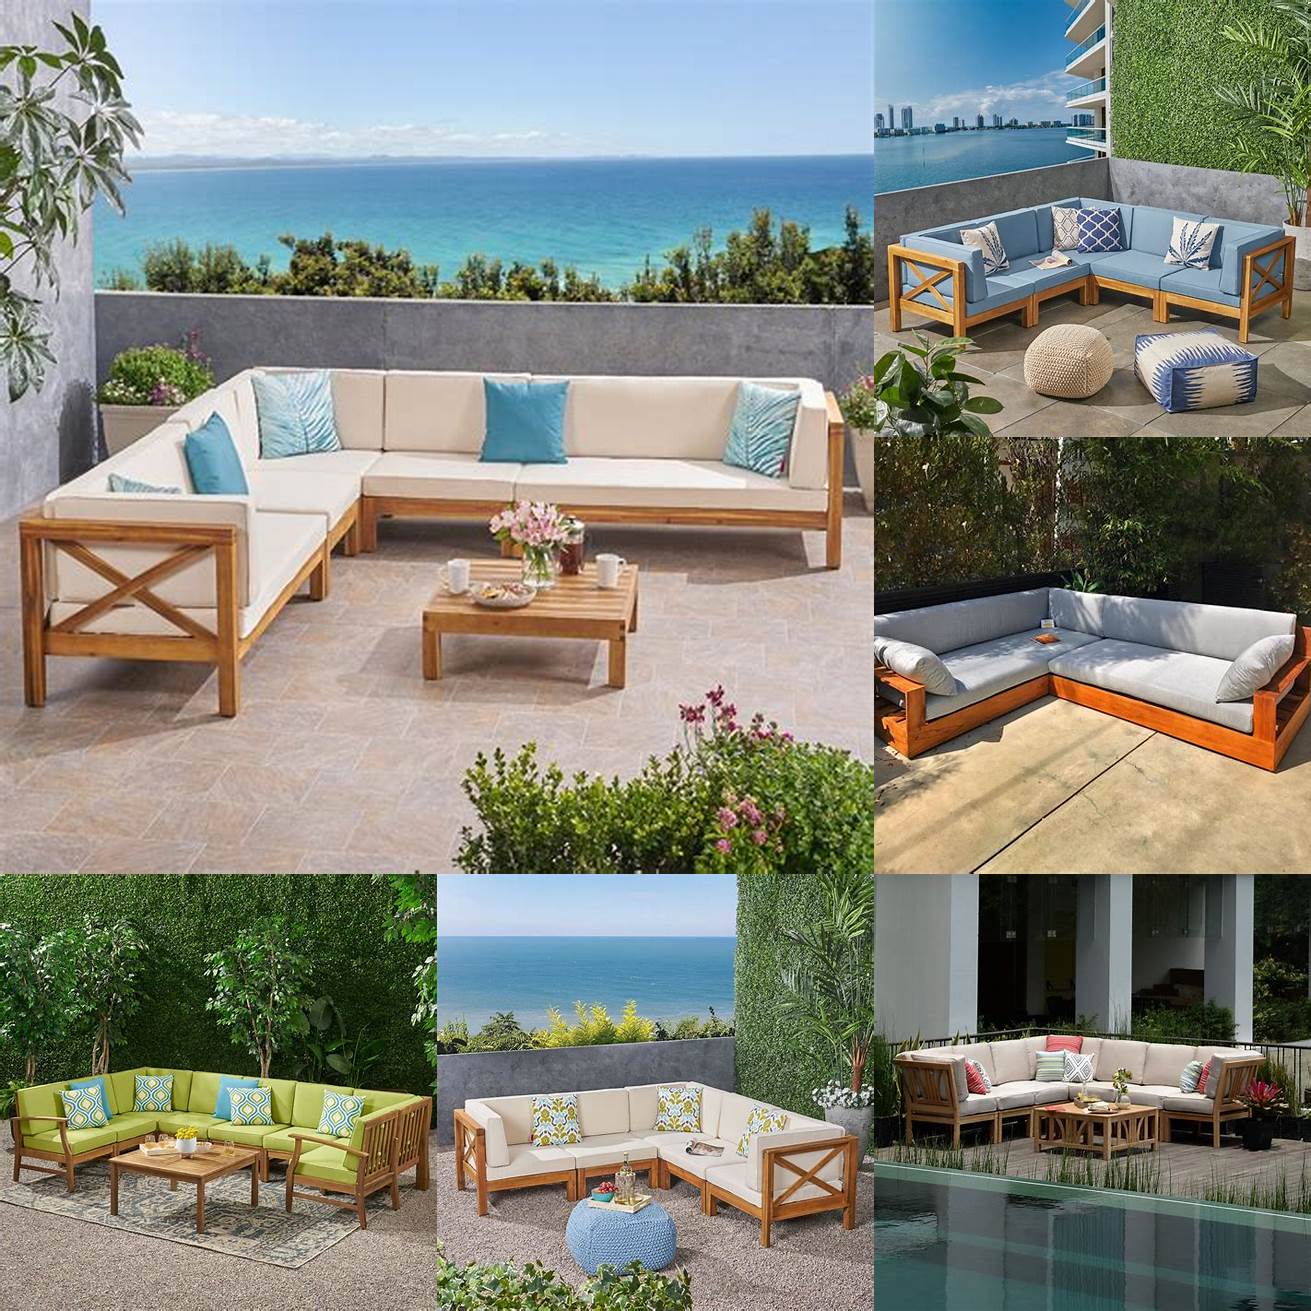 7 Teak outdoor furniture sectional deep cushions on a balcony